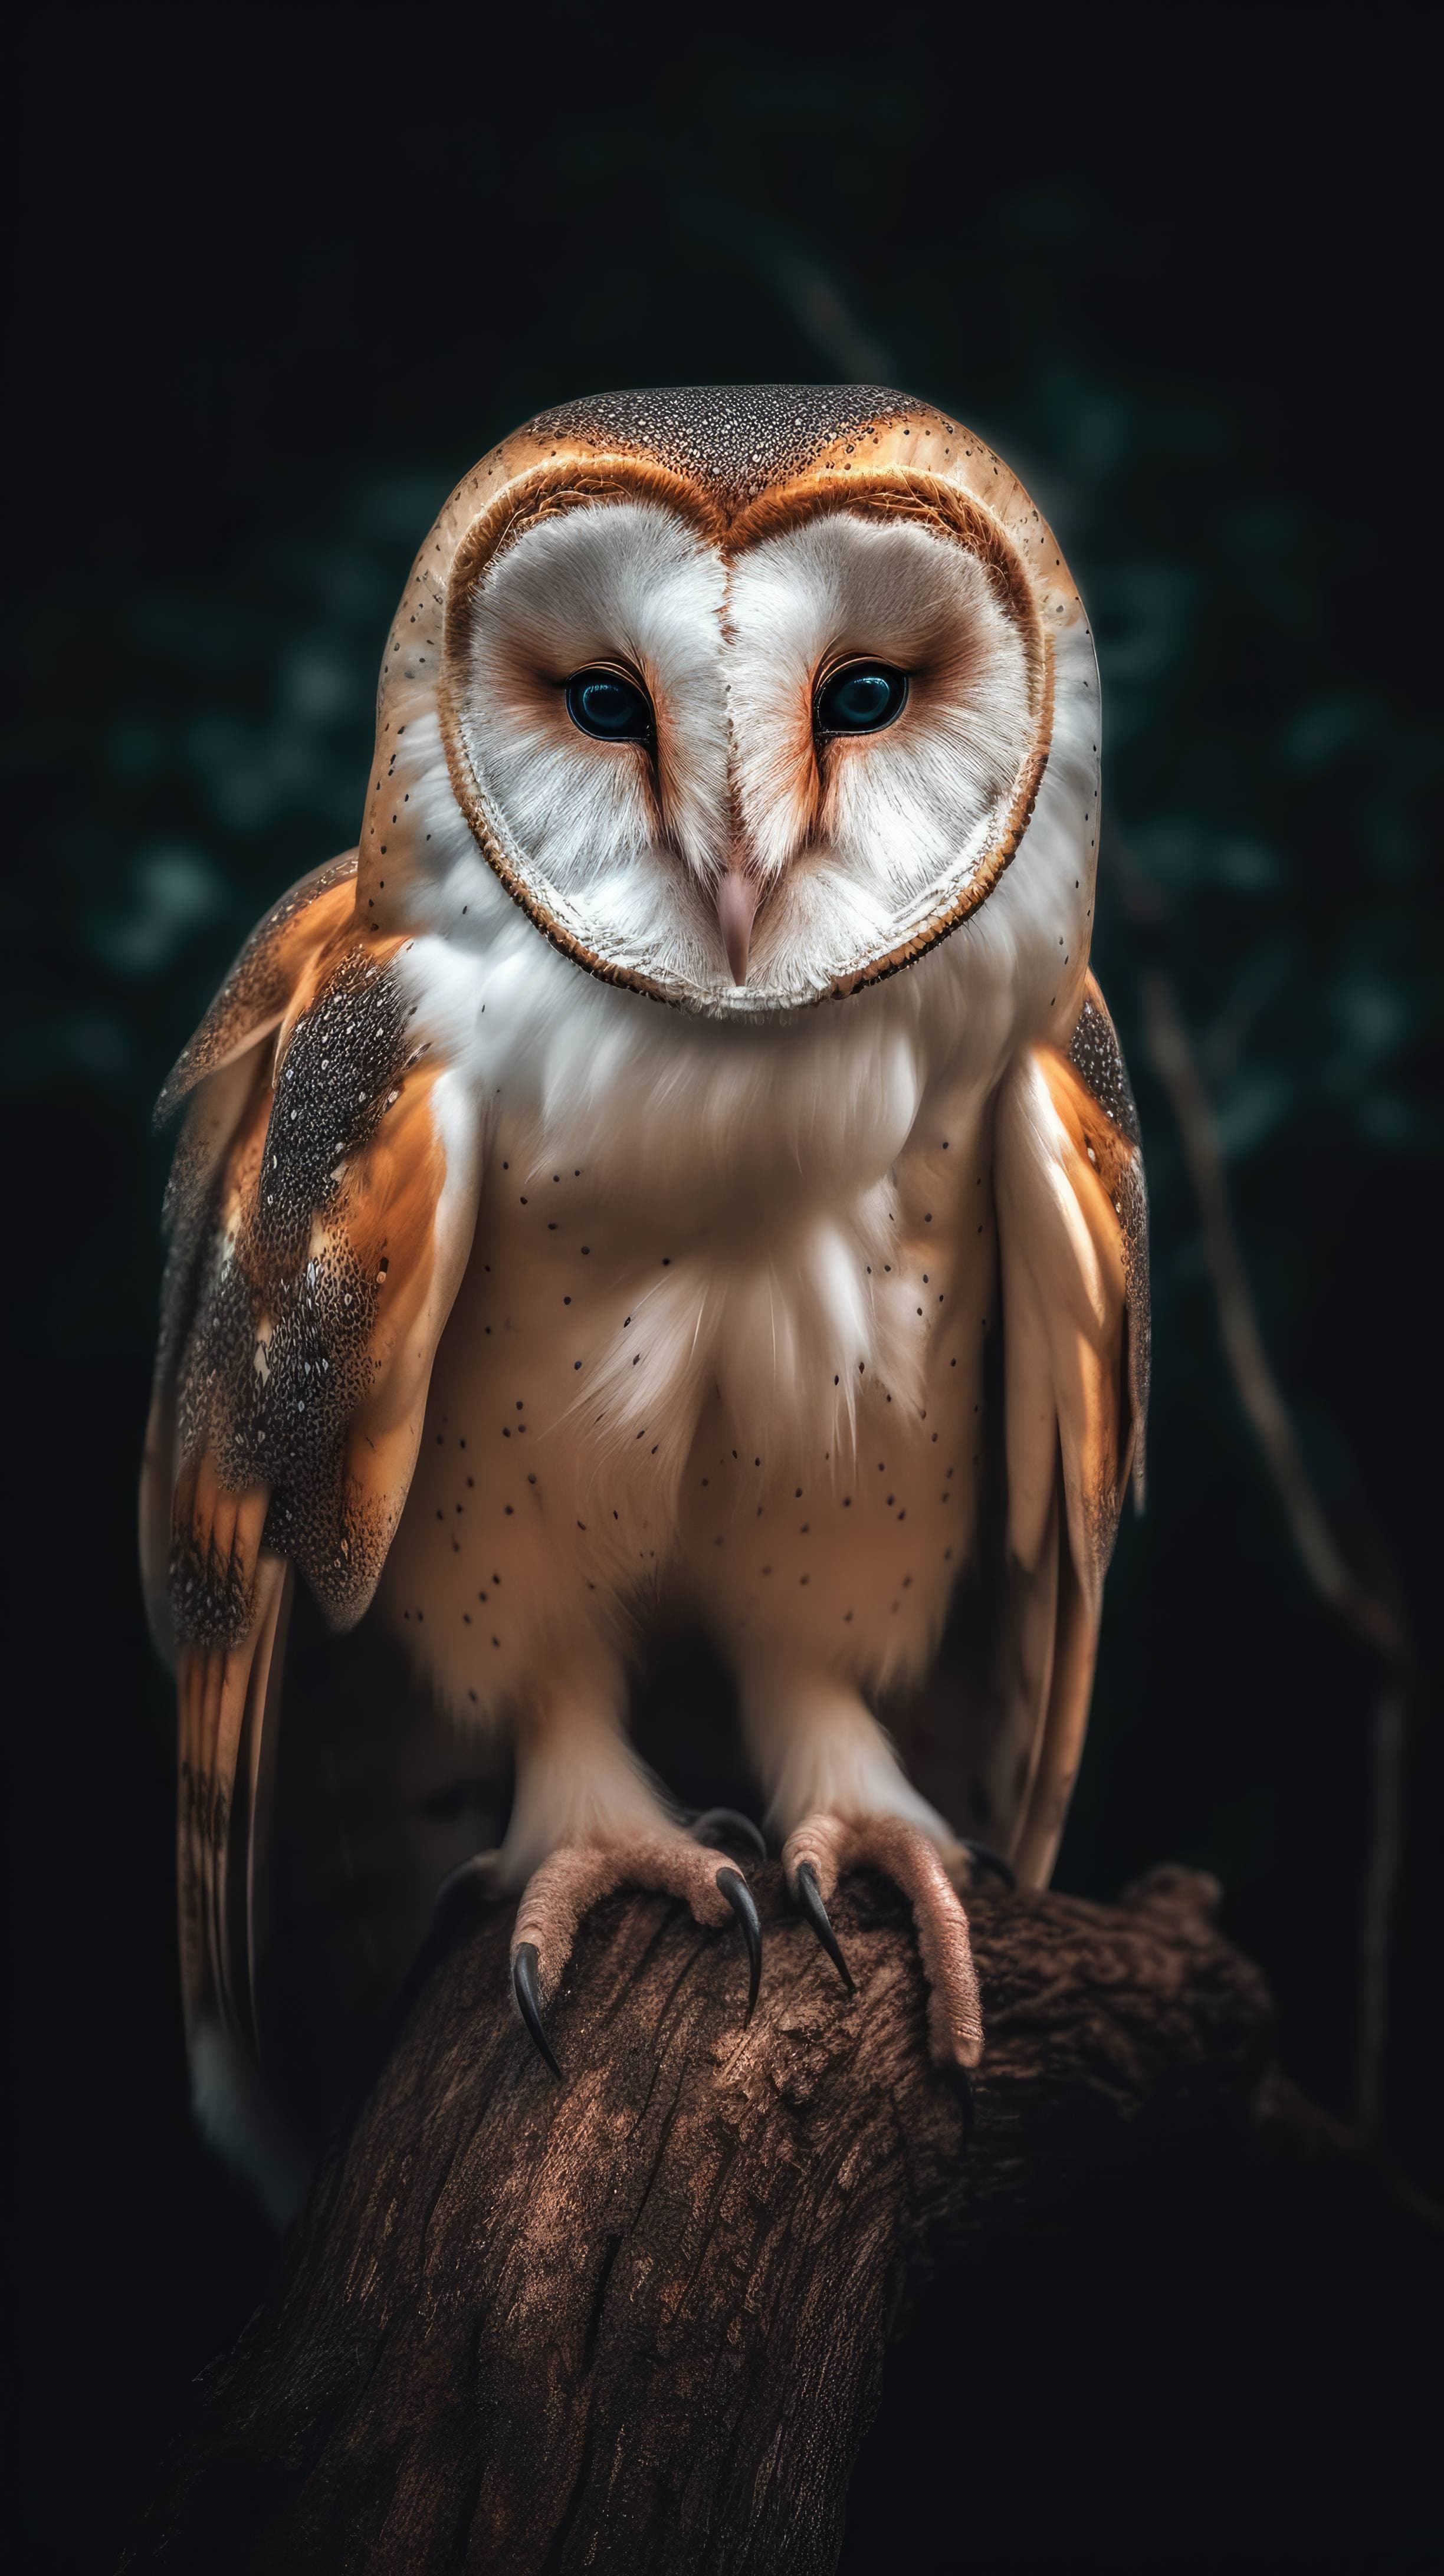 A 4K ultra HD mobile wallpaper showcasing a wise and majestic Barn Owl, perched on a gnarled branch, its soft feathers and keen eyes symbolizing wisdom and nocturnal beauty